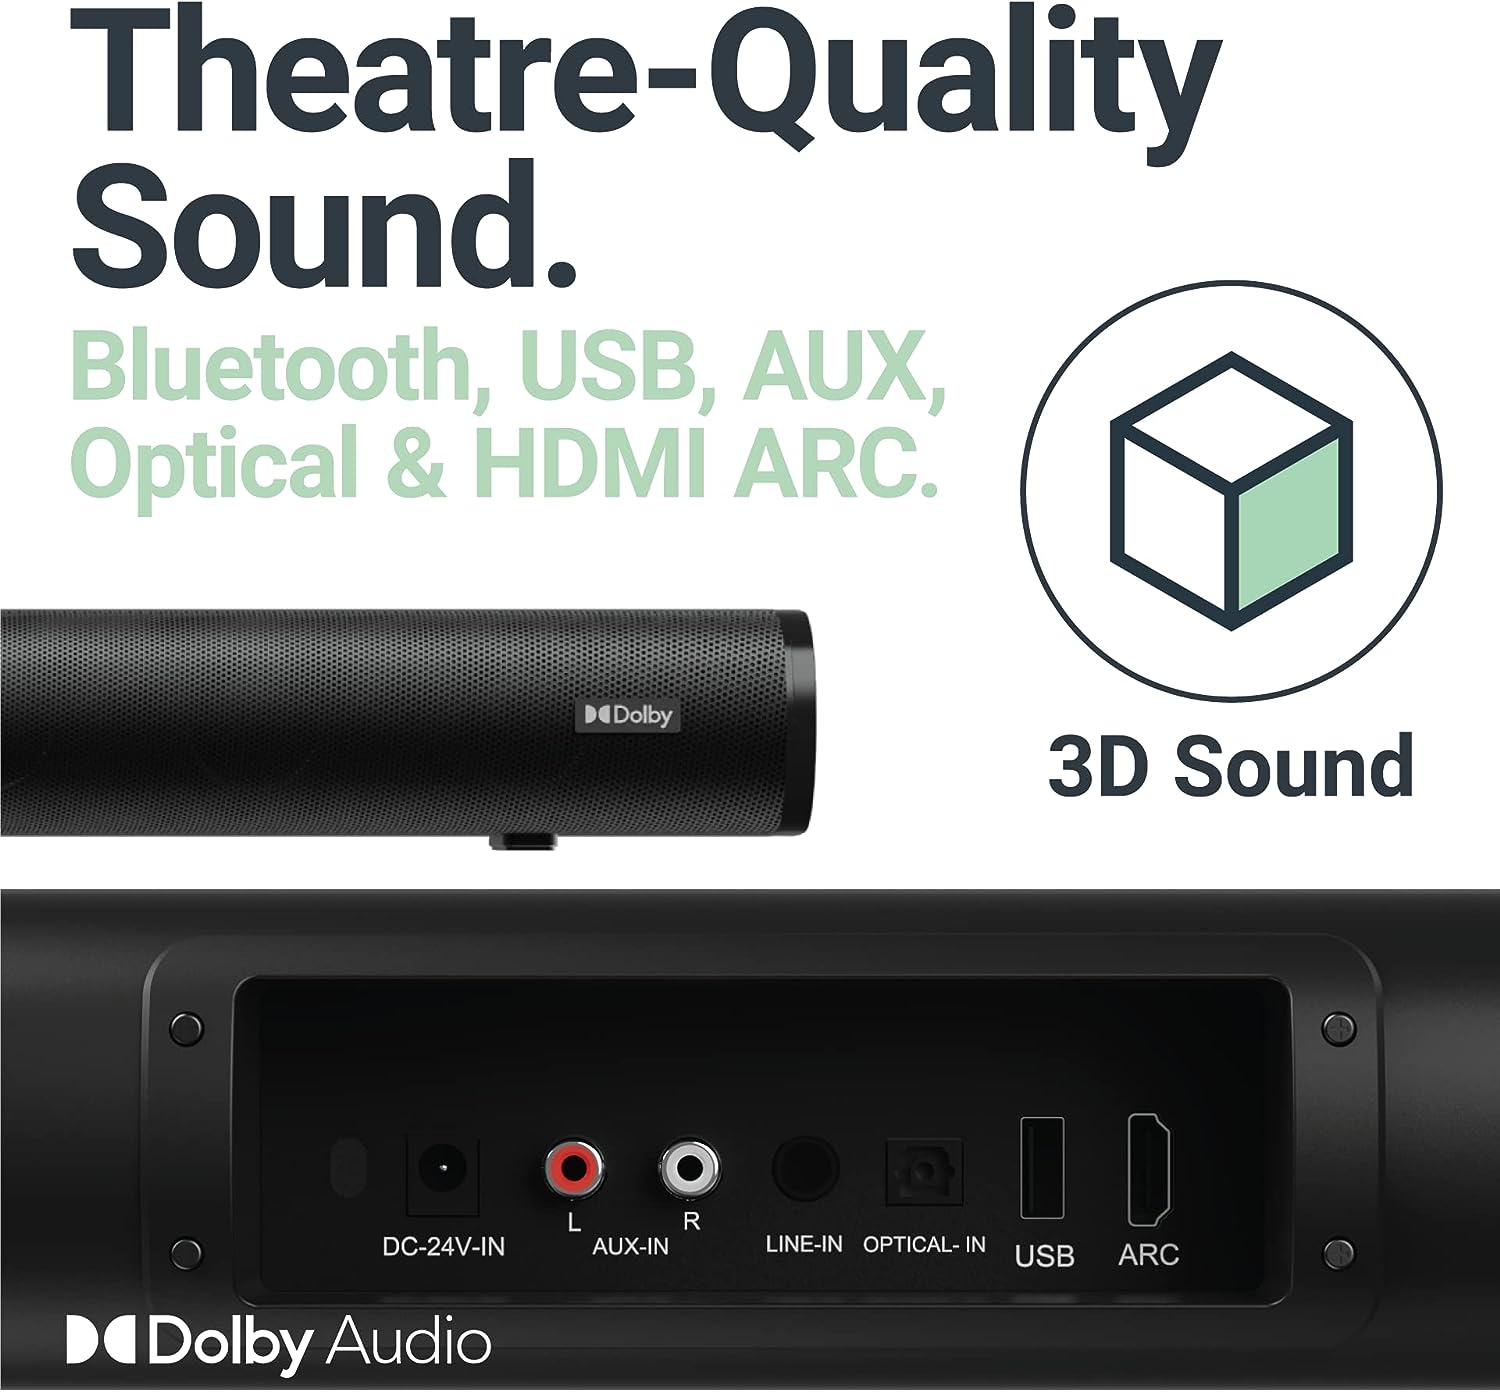 Majority Everest 5.1 Dolby Audio Surround Sound System with Sound Bar | Wireless Subwoofer I 300W Powerful Surround Sound | Home Theatre 3D Audio with Detachable Speakers | HDMI ARC, HDMI, Bluetooth